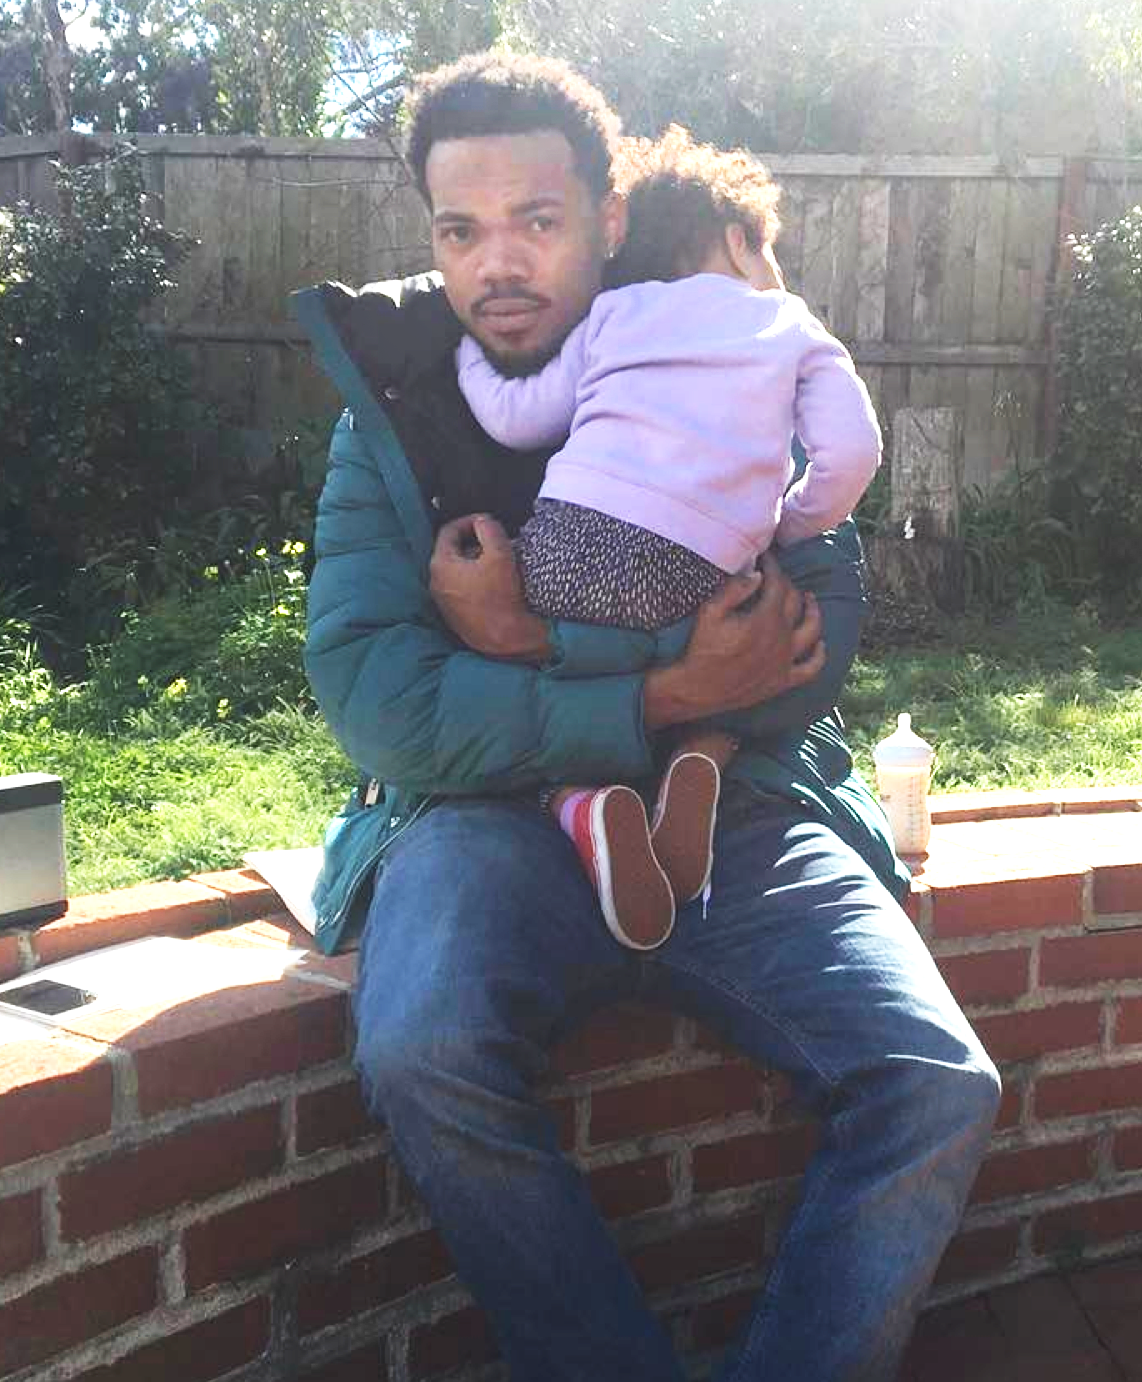 Chance The Rapper Has A Cheat Code For Dads Doing Their Daughter's Hair
